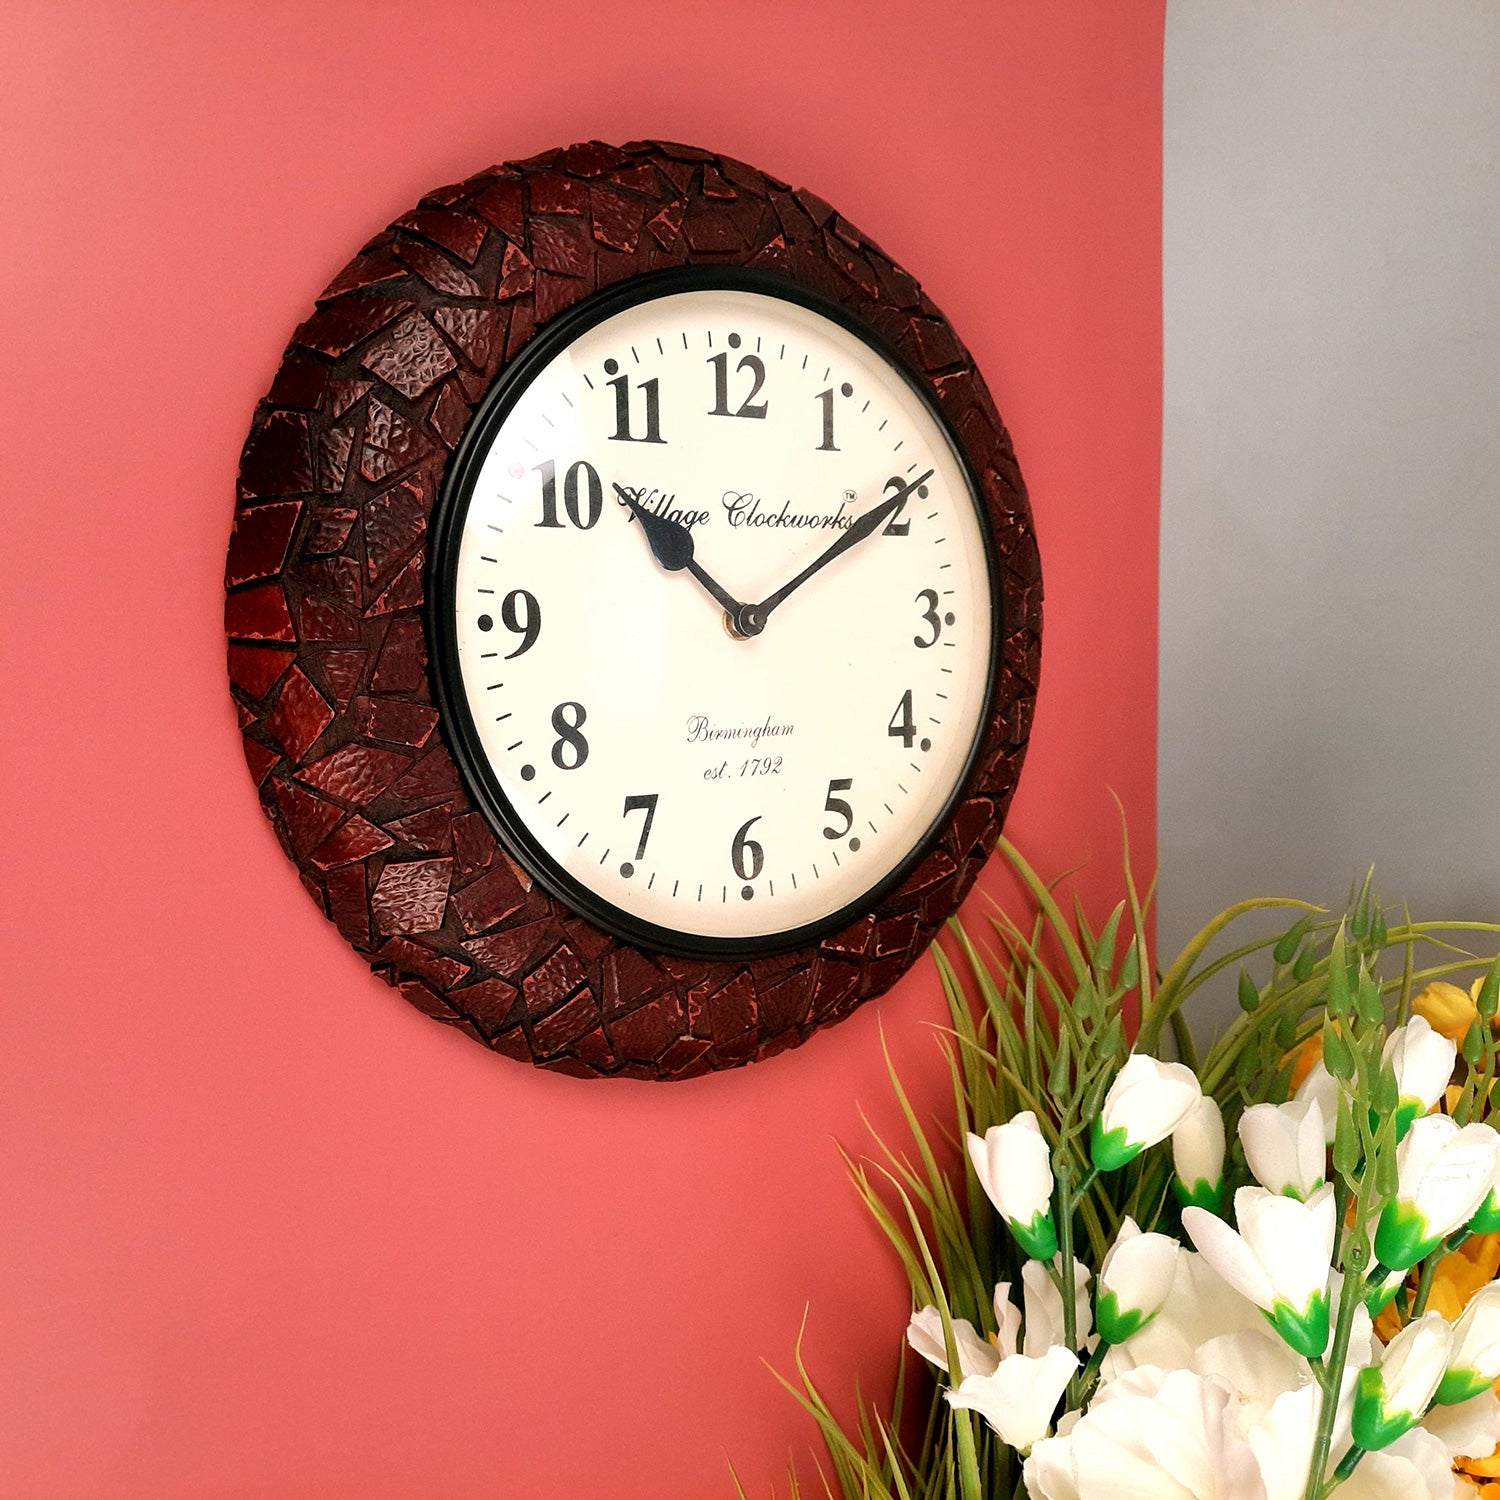 Wall Clock for Home | Wall Mount Analog Big Watch With Antique Brass Work  - For Living Room, Bedroom, Hall, Office Decor & Gift - 12 Inch